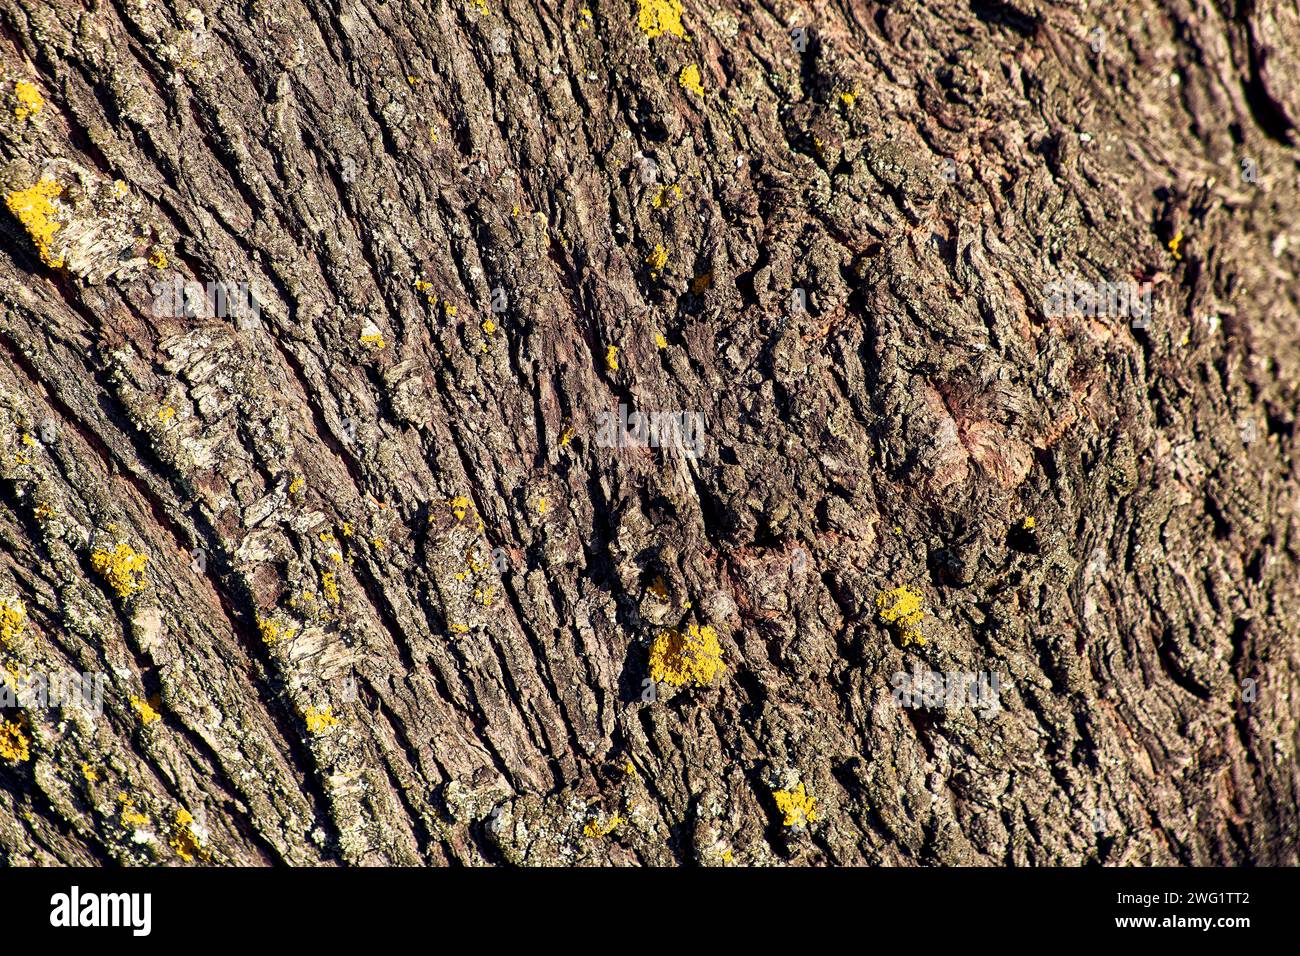 Almond tree in the patio of a town house. Detail plan of almond bark with lichen (holobionte). Stock Photo